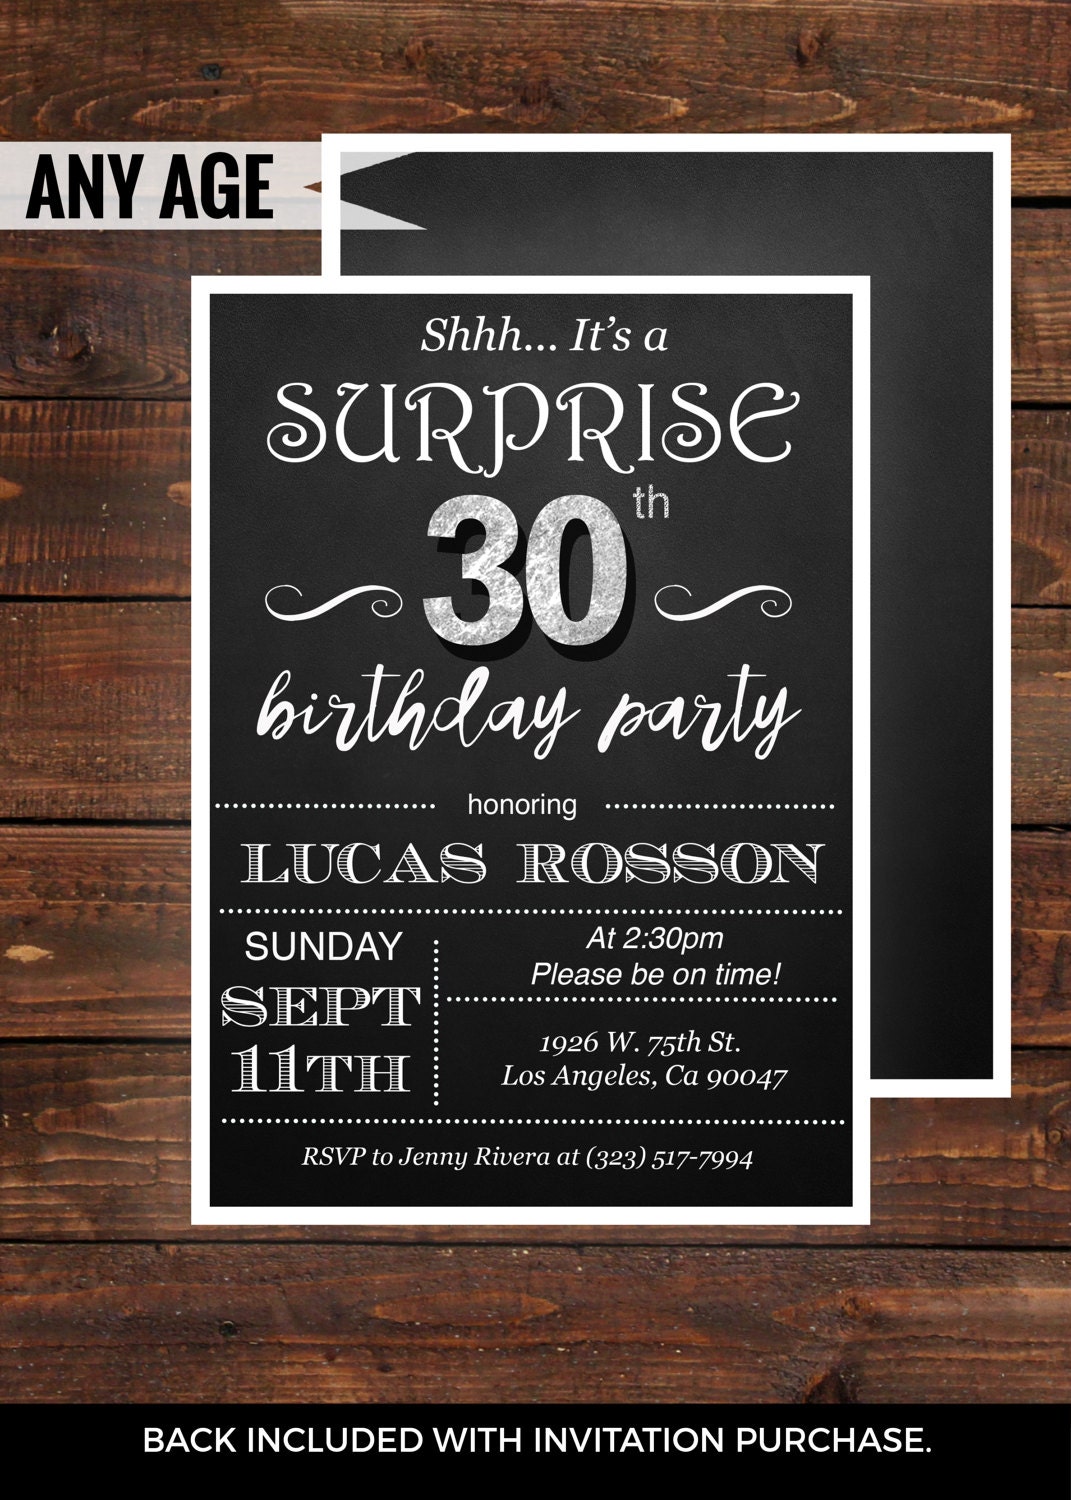 Surprise 30th birthday invitations for him by